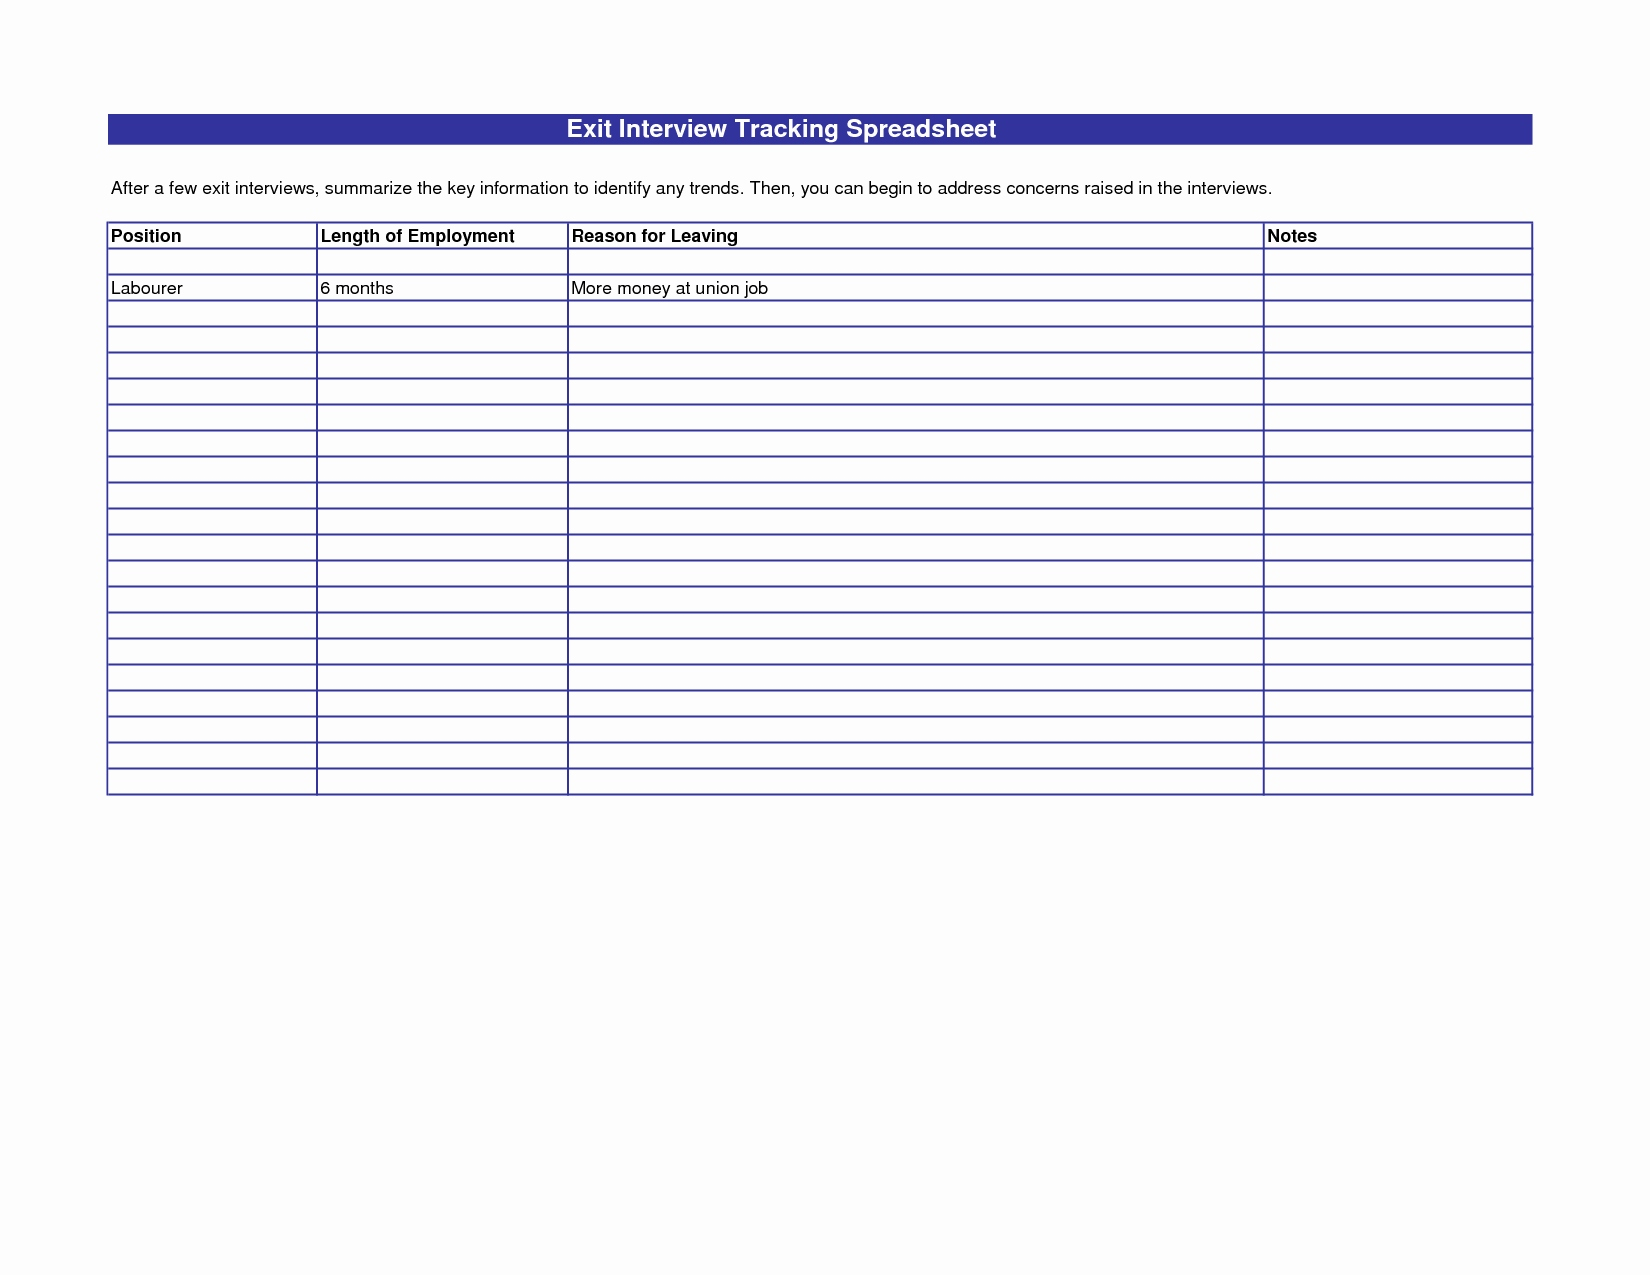 Application Tracking Spreadsheet intended for Sheet Job Candidate Tracking Spreadsheet Tracker Excel Application